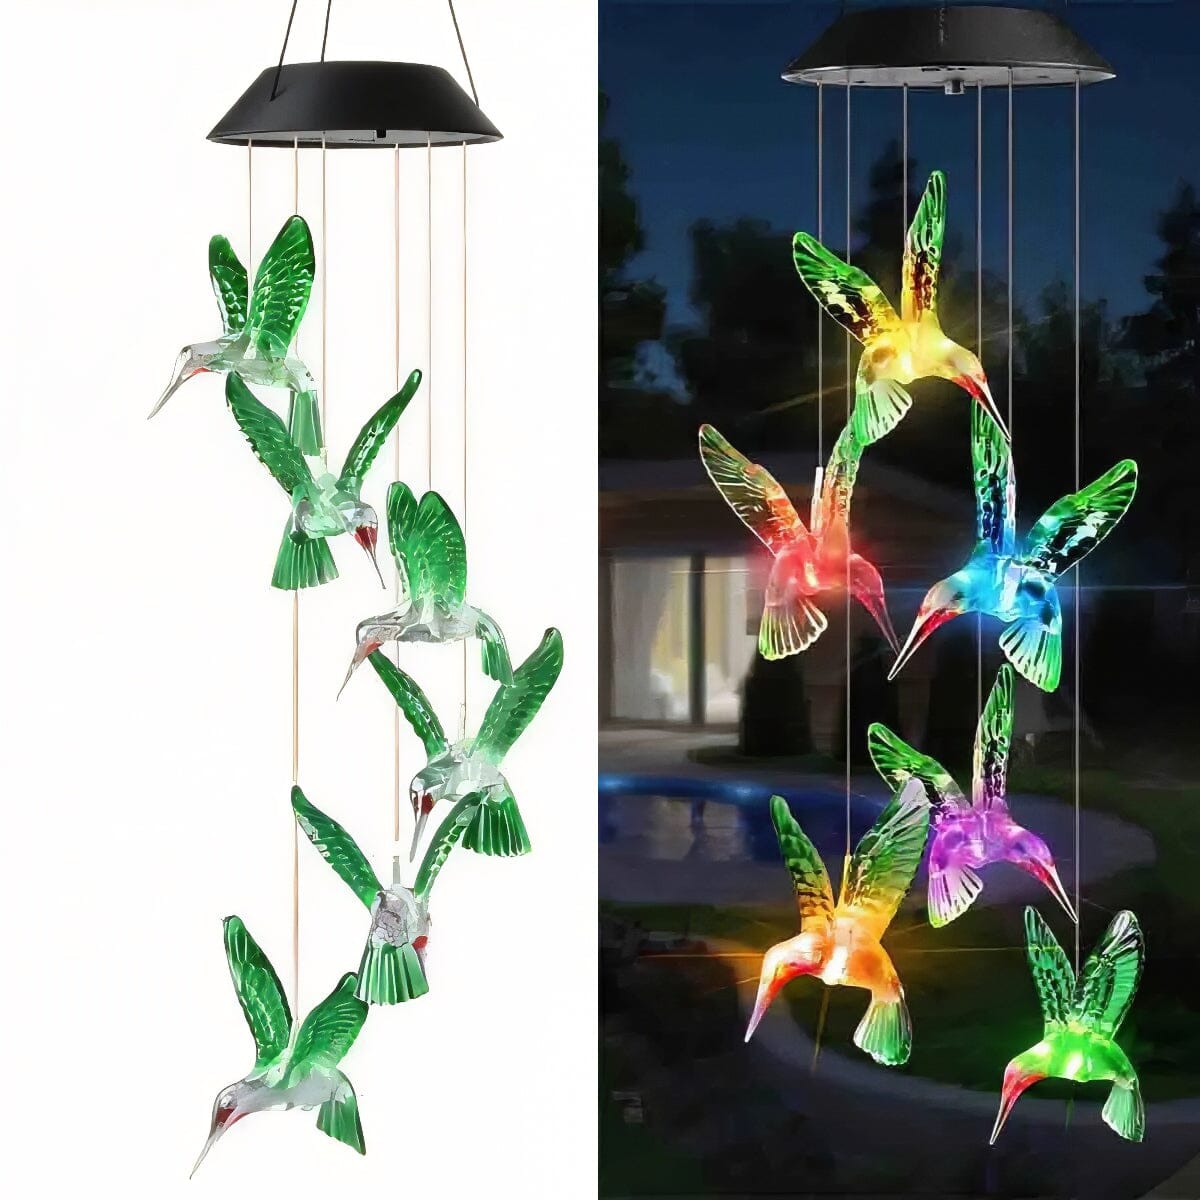 GoodVybe™ Solar LED Hummingbird Wind Chime Lights: Color-Changing Garden Decor wind chime GoodVybe™ 